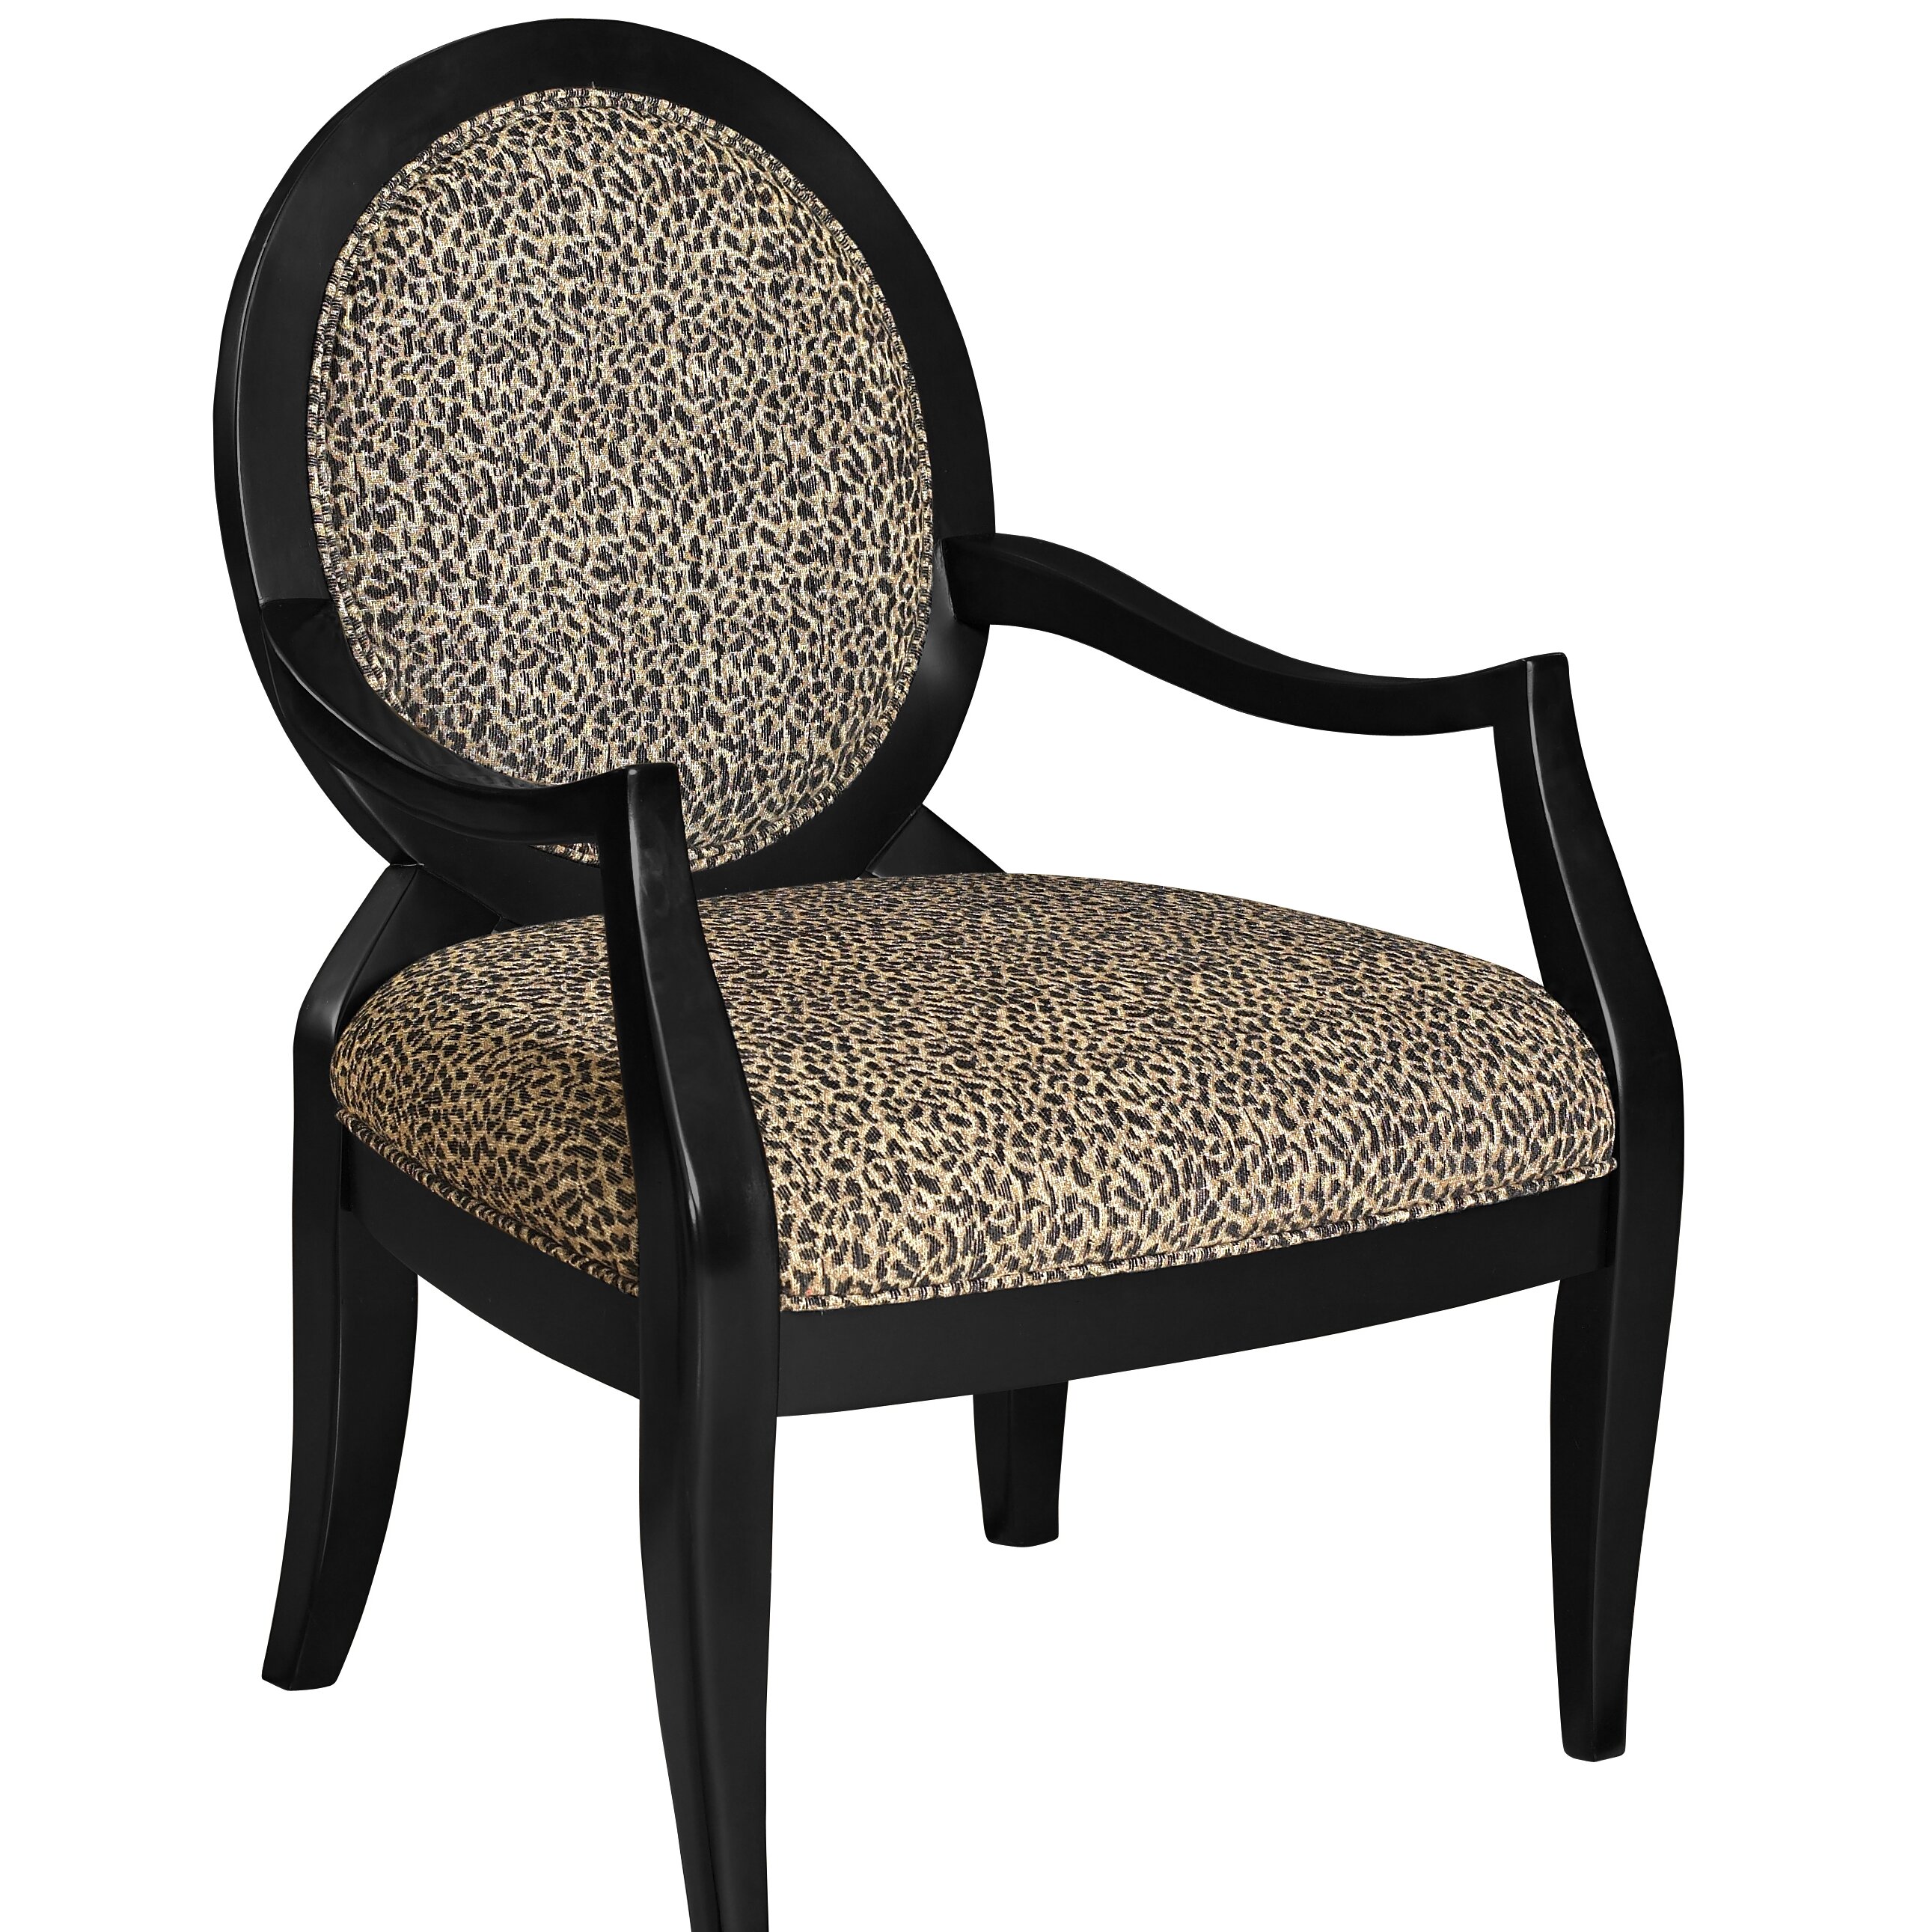 Powell Furniture Classic Seating Leopard Fabric Arm Chair 502 622 